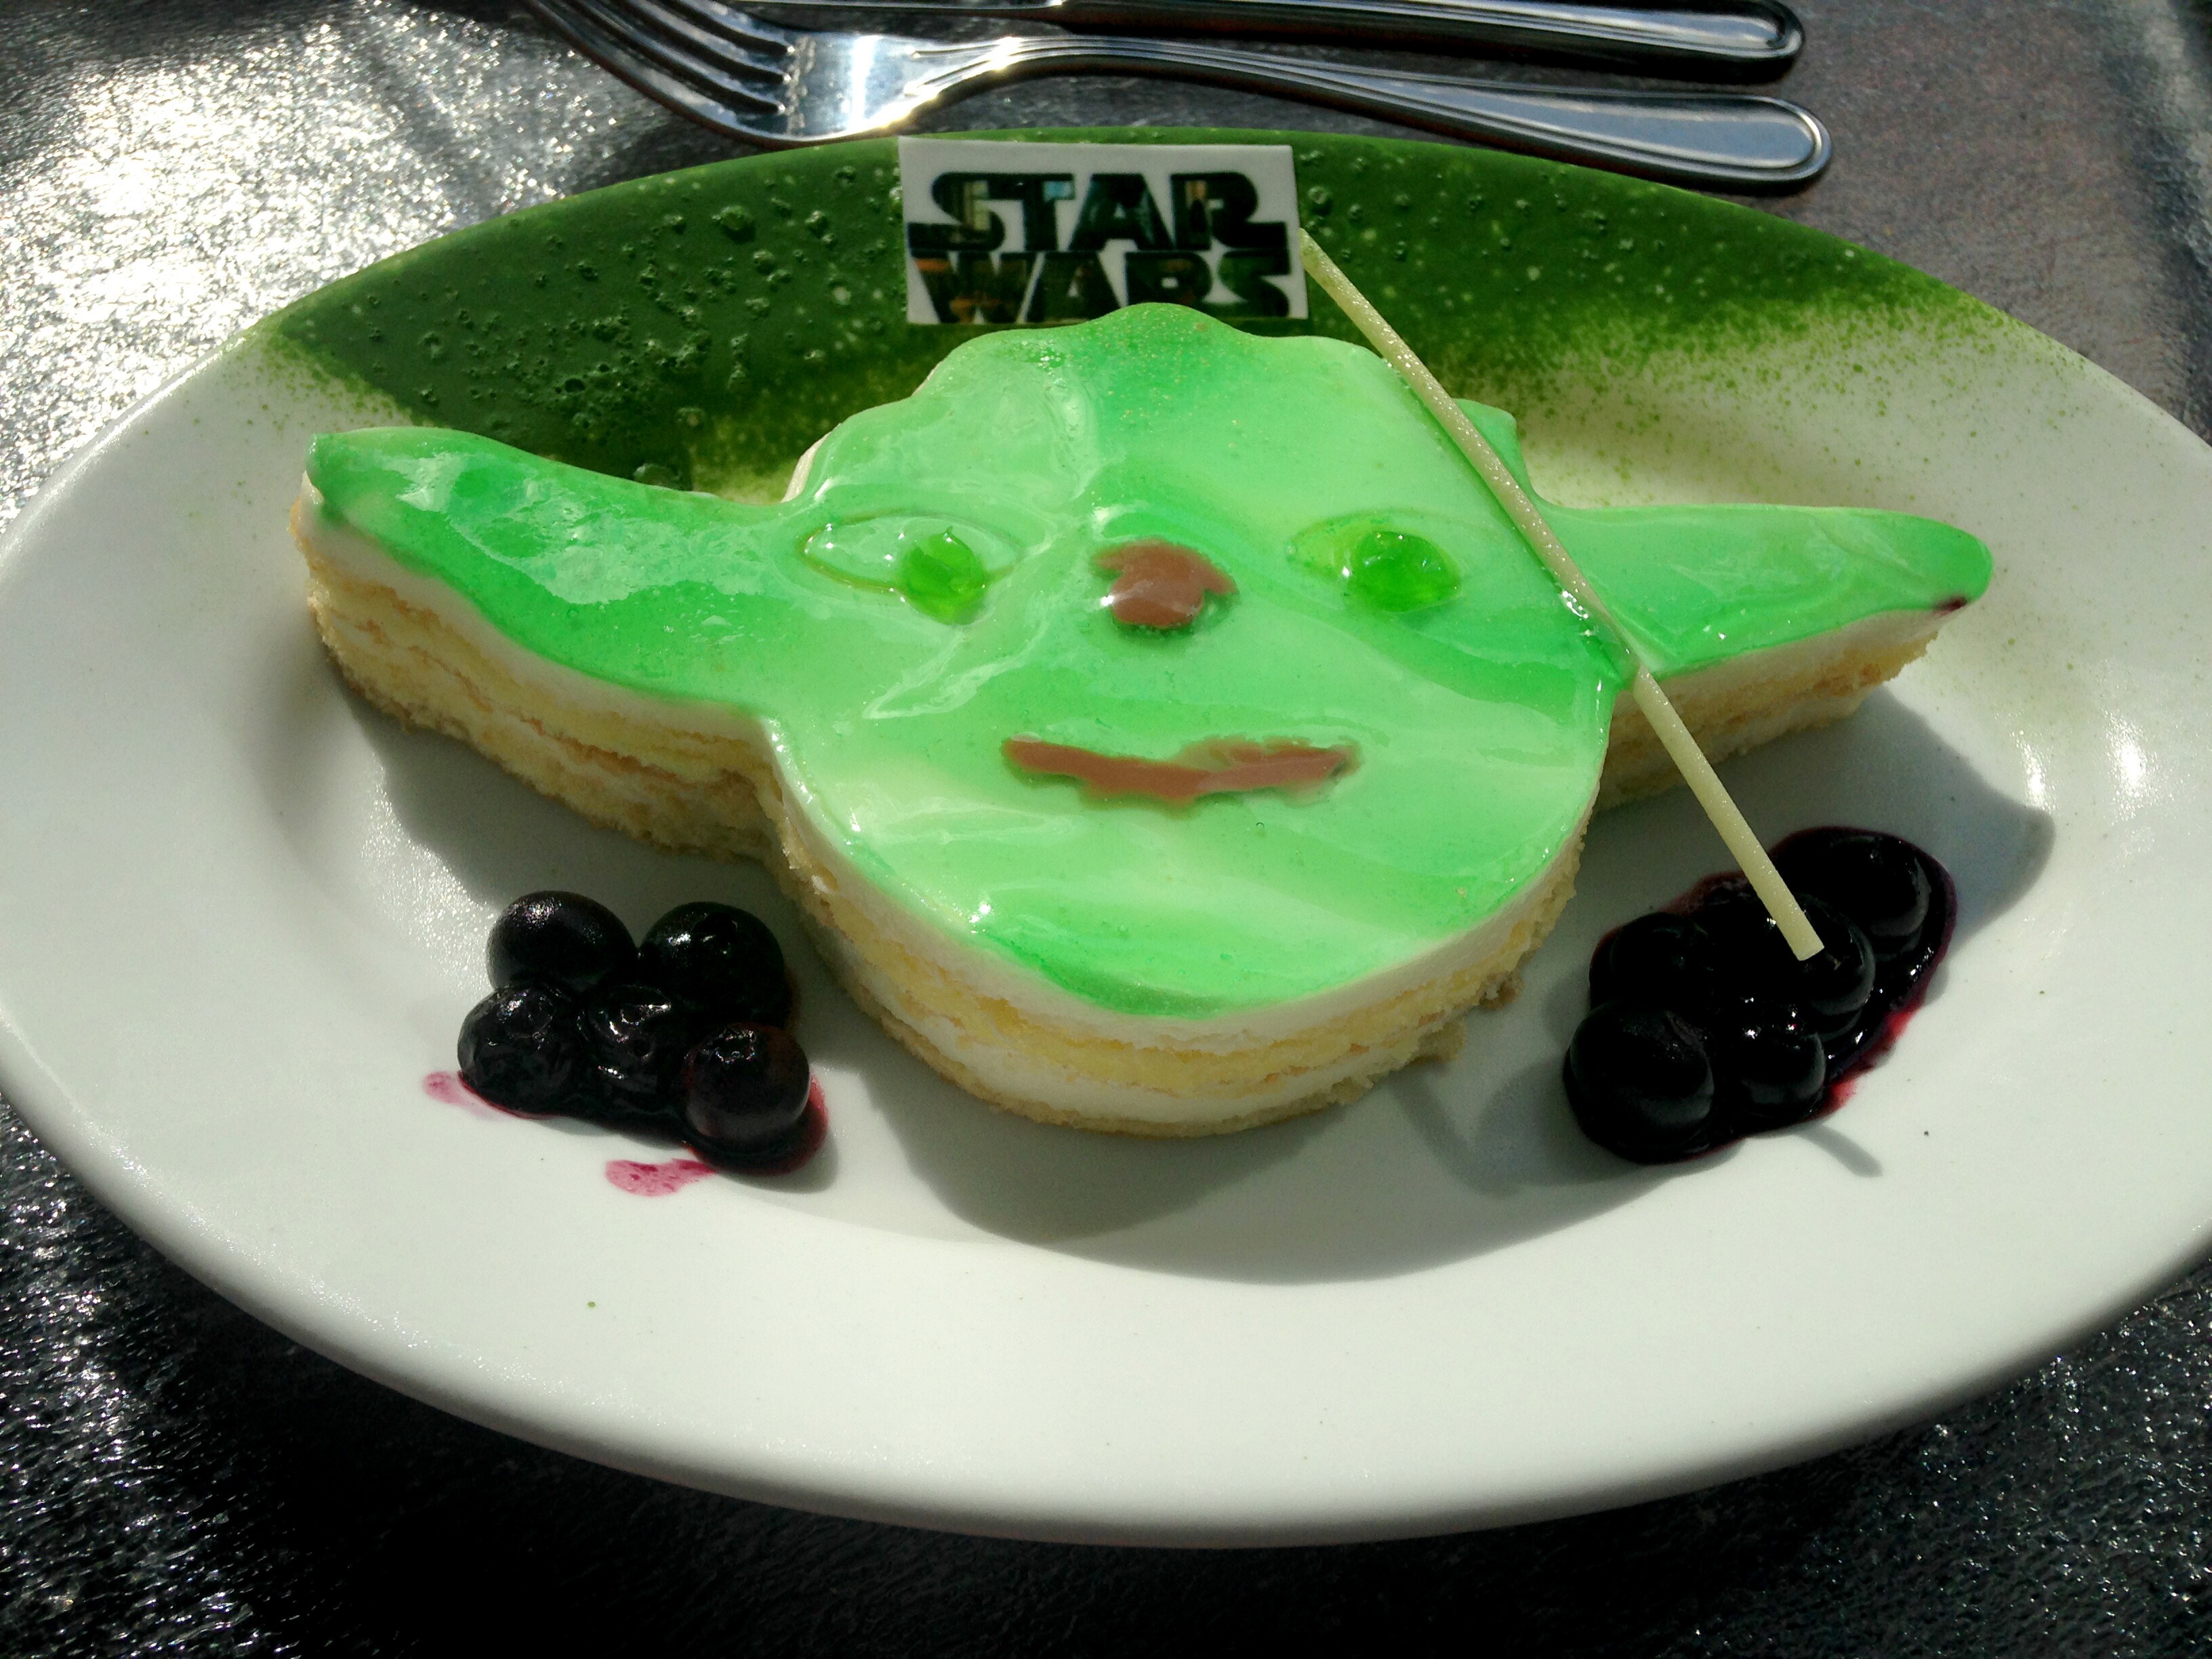 Baby Yoda Drawings Imagine The Child Enjoying Junk Food of All Kinds